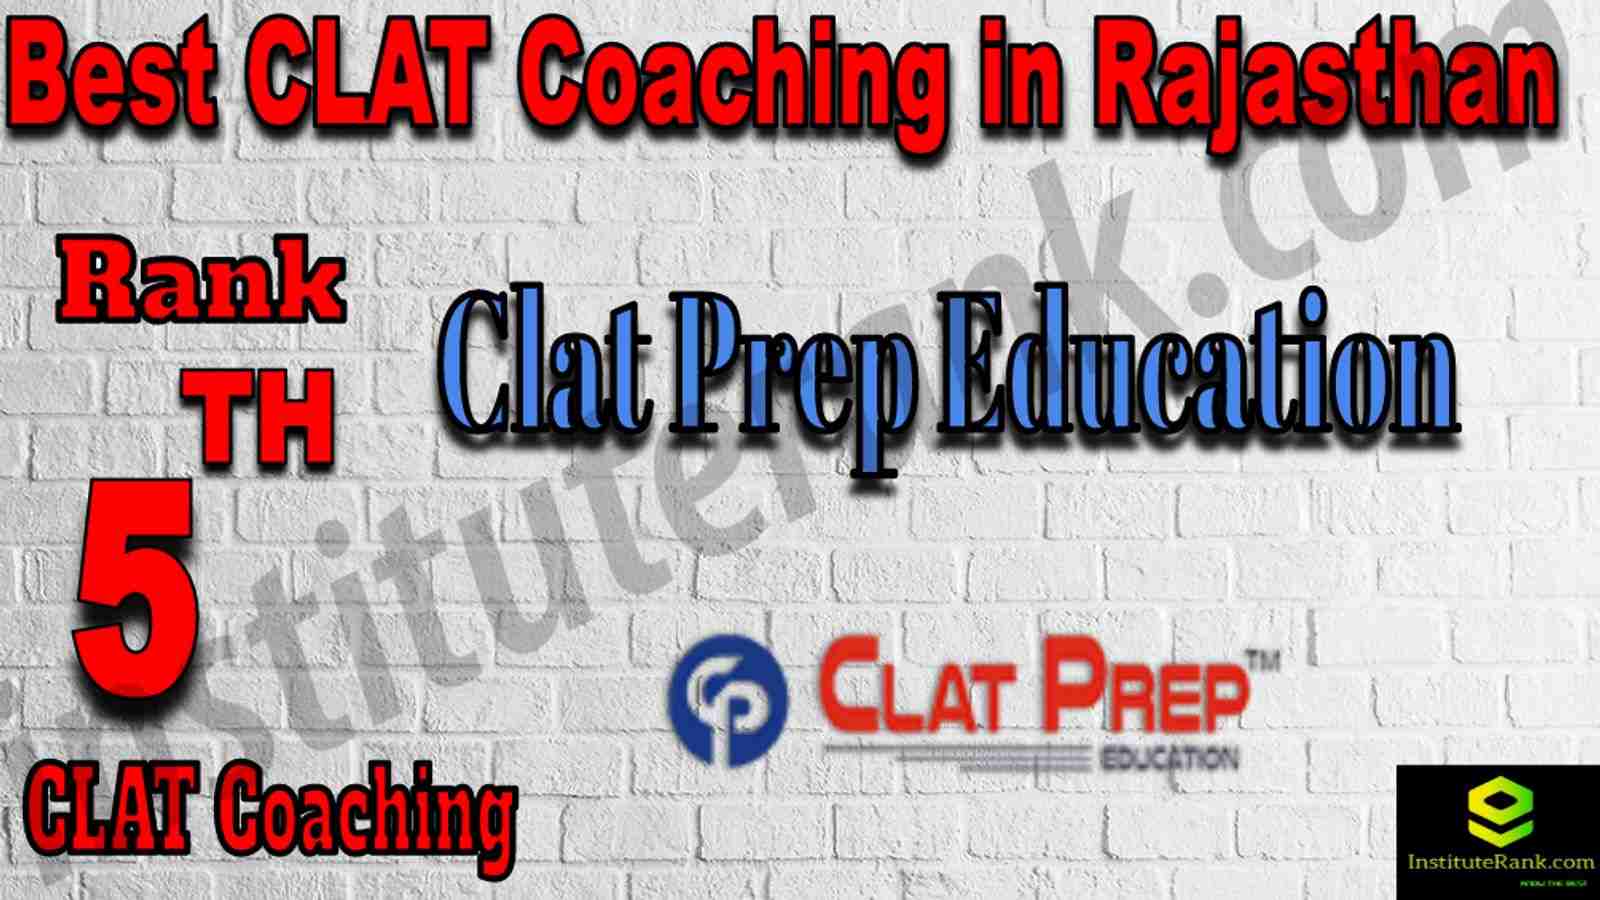 5th Best Clat Coaching in Rajasthan